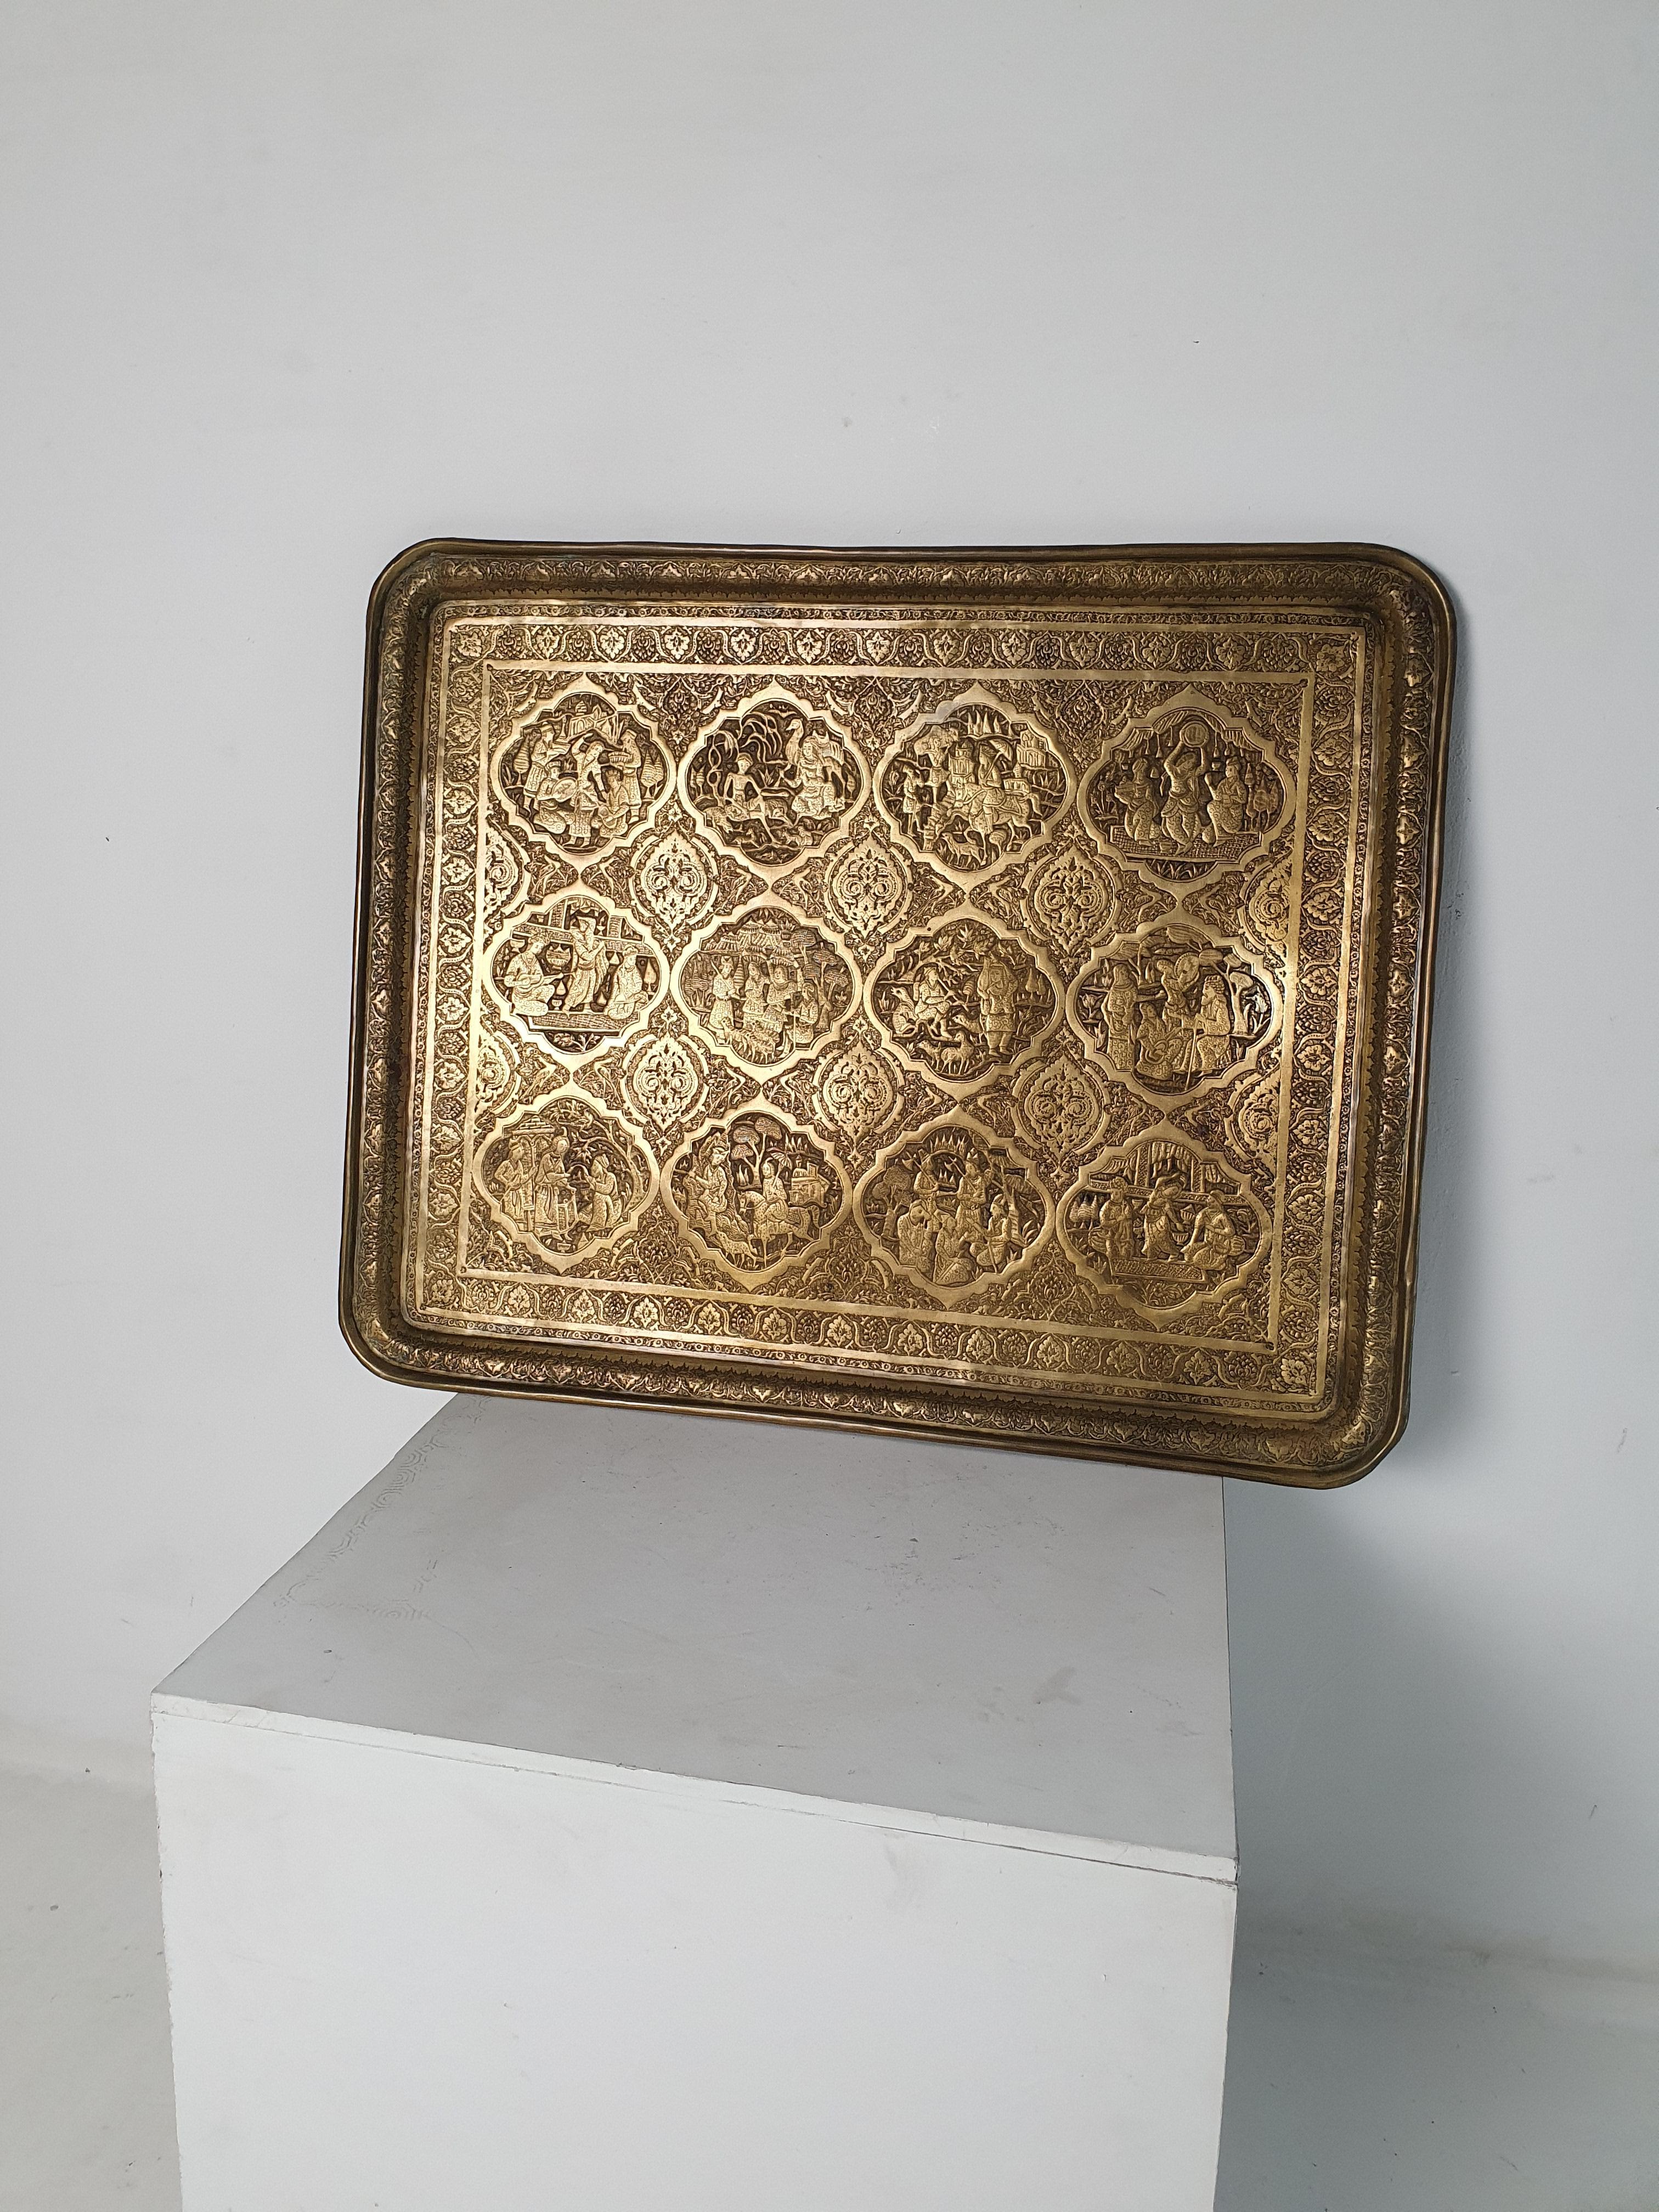 Behold this stunning piece from the Qajar dynasty - a large rectangular brass tray with rounded corners. This masterpiece was created using the intricate ghalamzani technique, which involves wrought and engraved décor featuring motifs from Persian